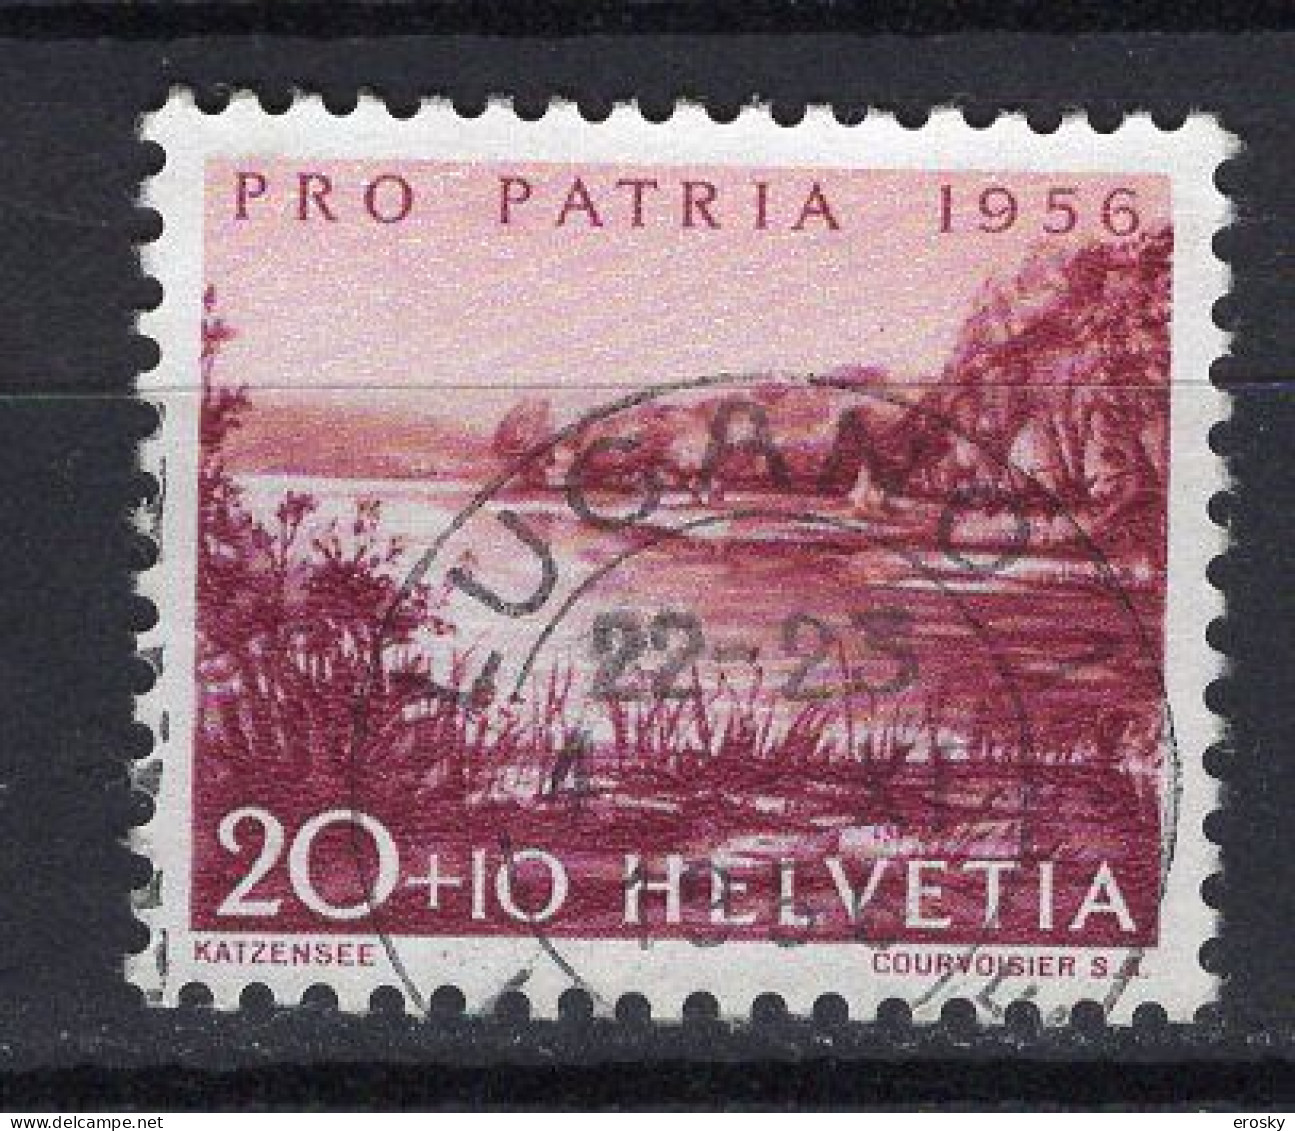 T3134 - SUISSE SWITZERLAND Yv N°578 Pro Patria Fete Nationale - Used Stamps